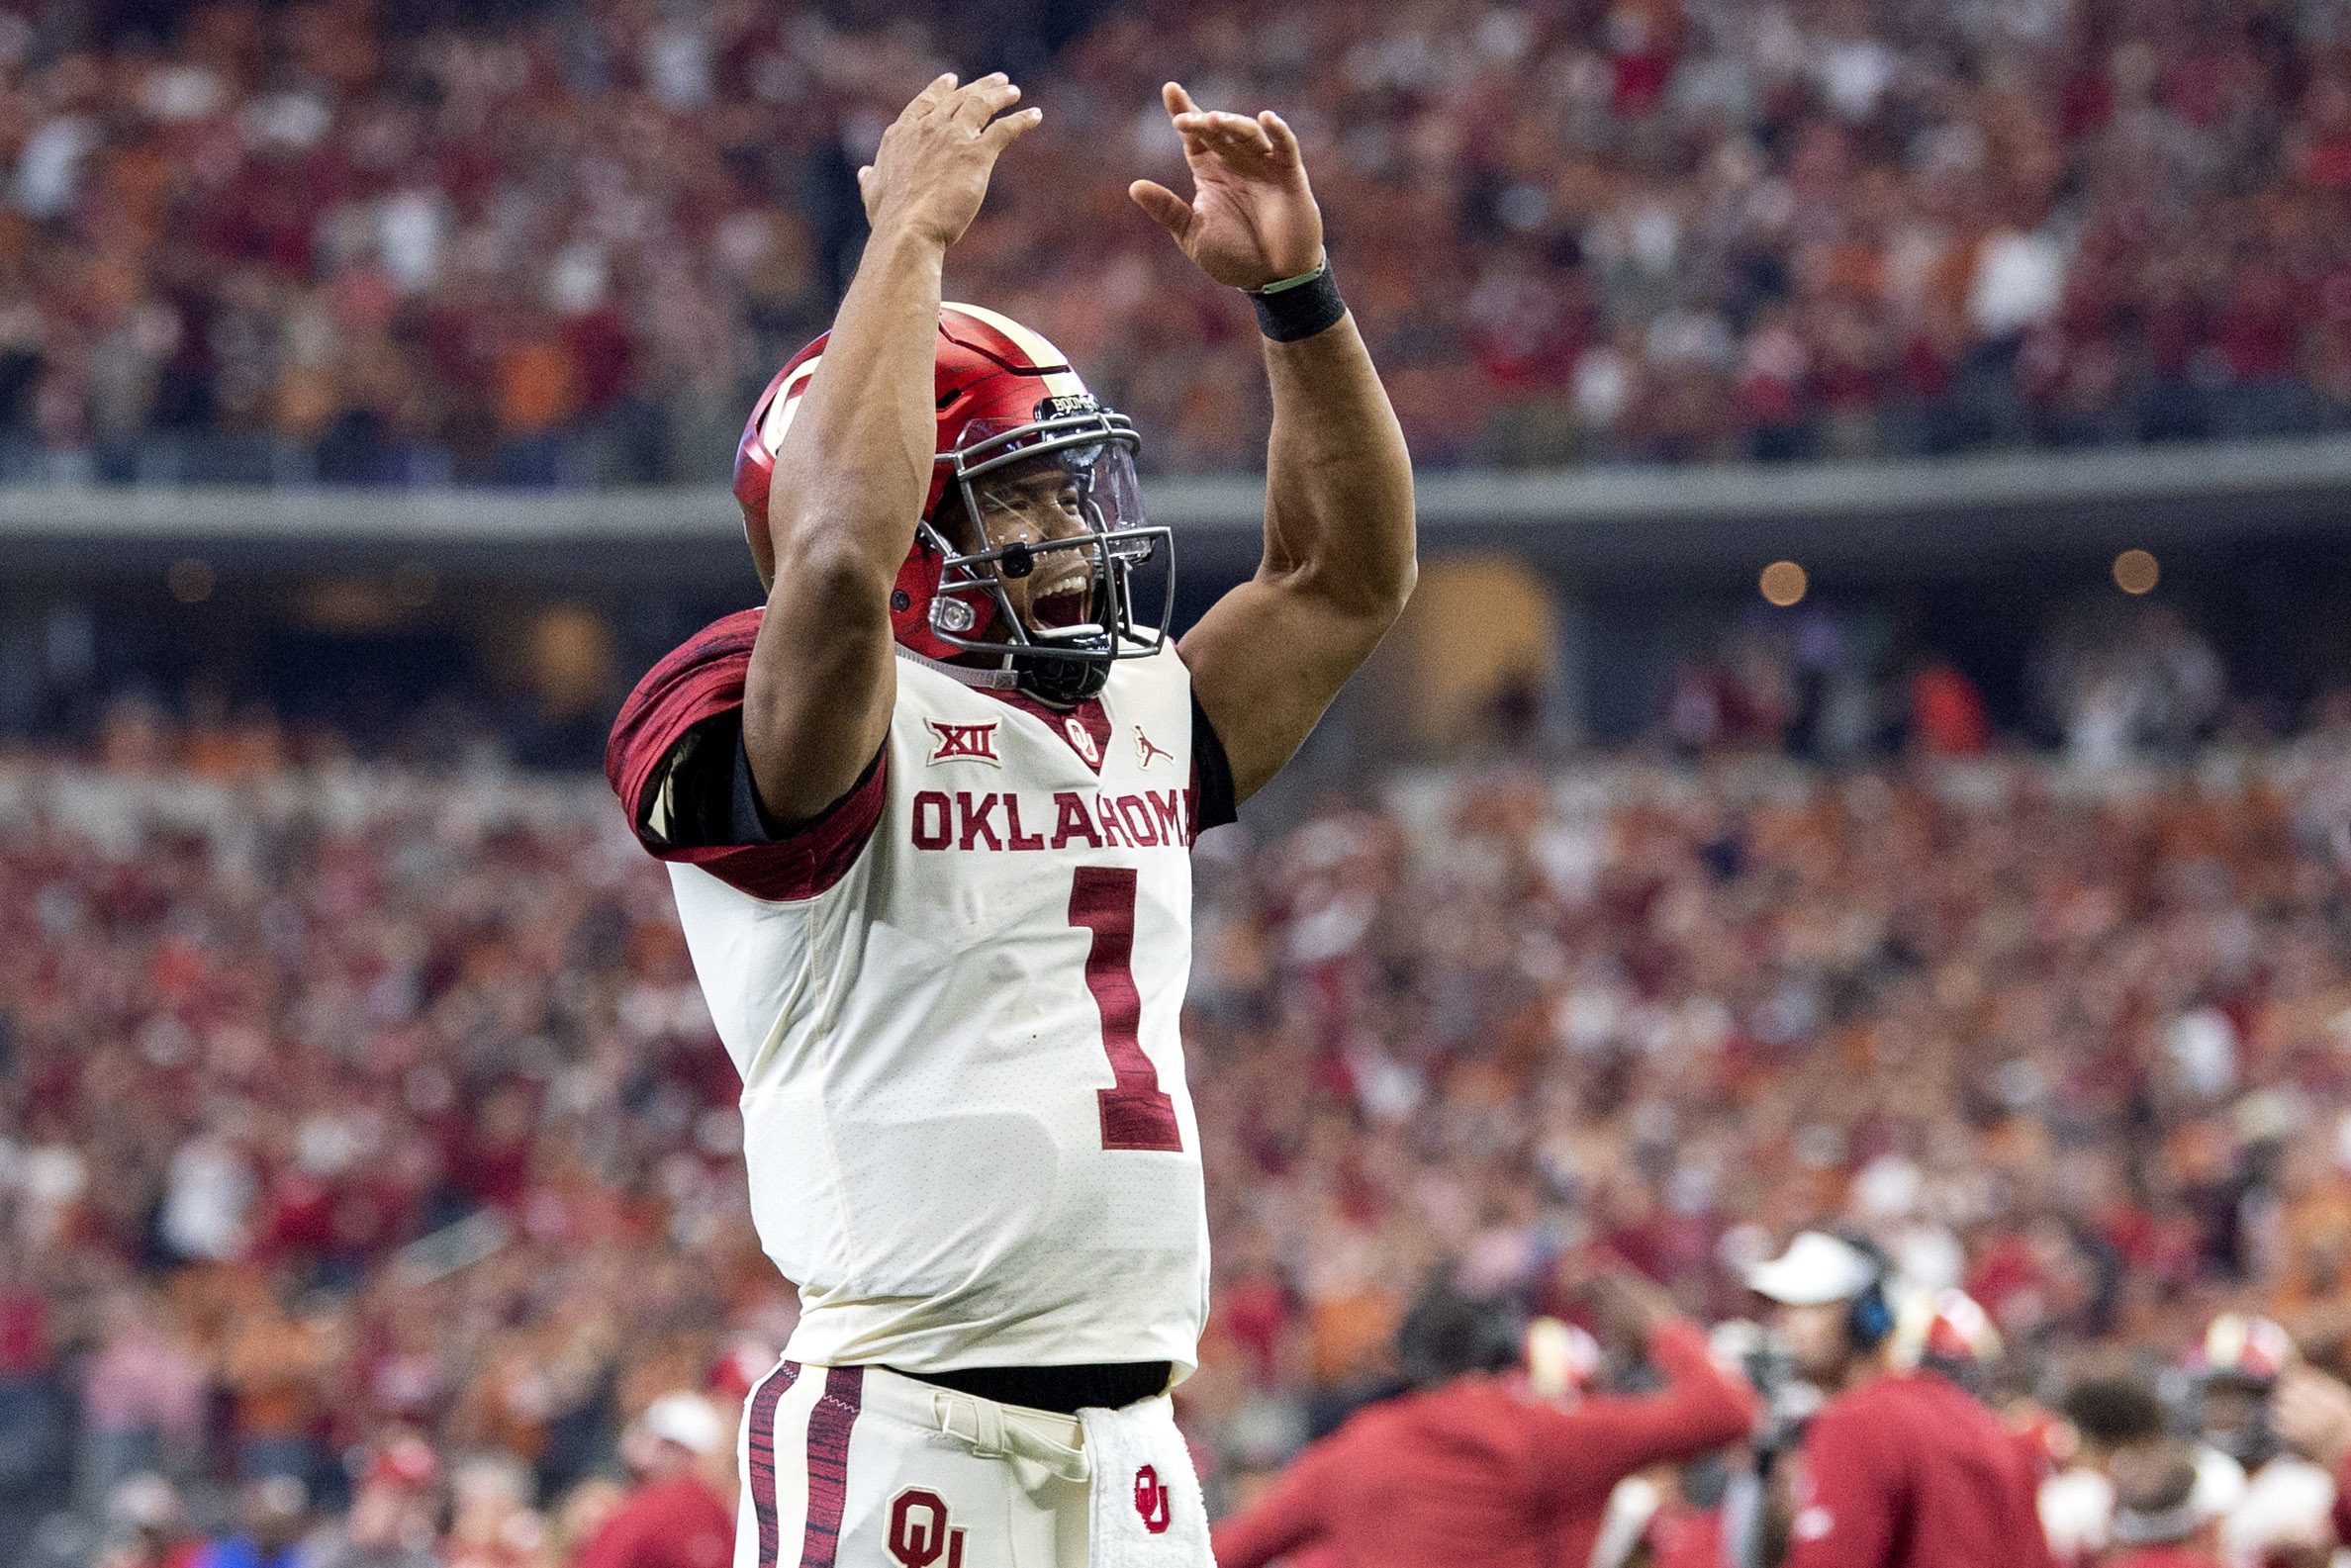 How Tall Is Kyler Murray? Oklahoma Sooners Don't Even Know